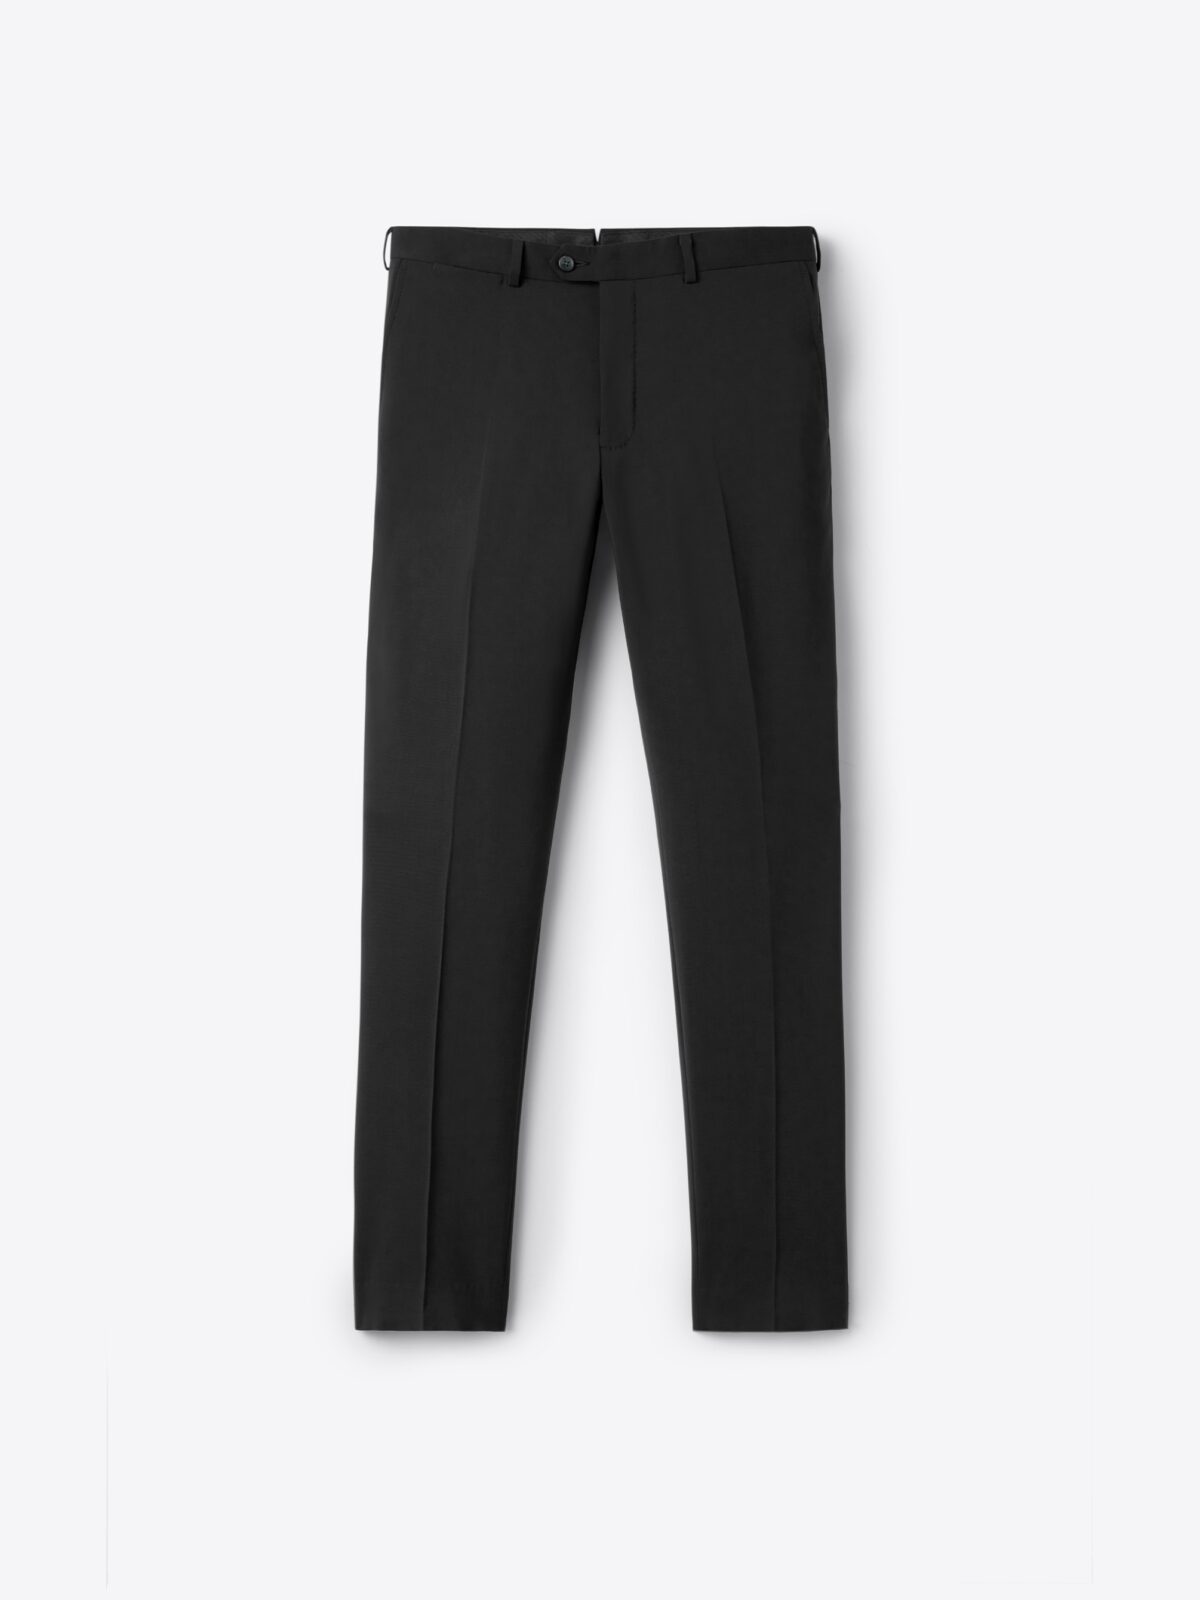 Stretch Micro Check Modern-Fit TECHNI-COLE Dress Pant | Kenneth Cole